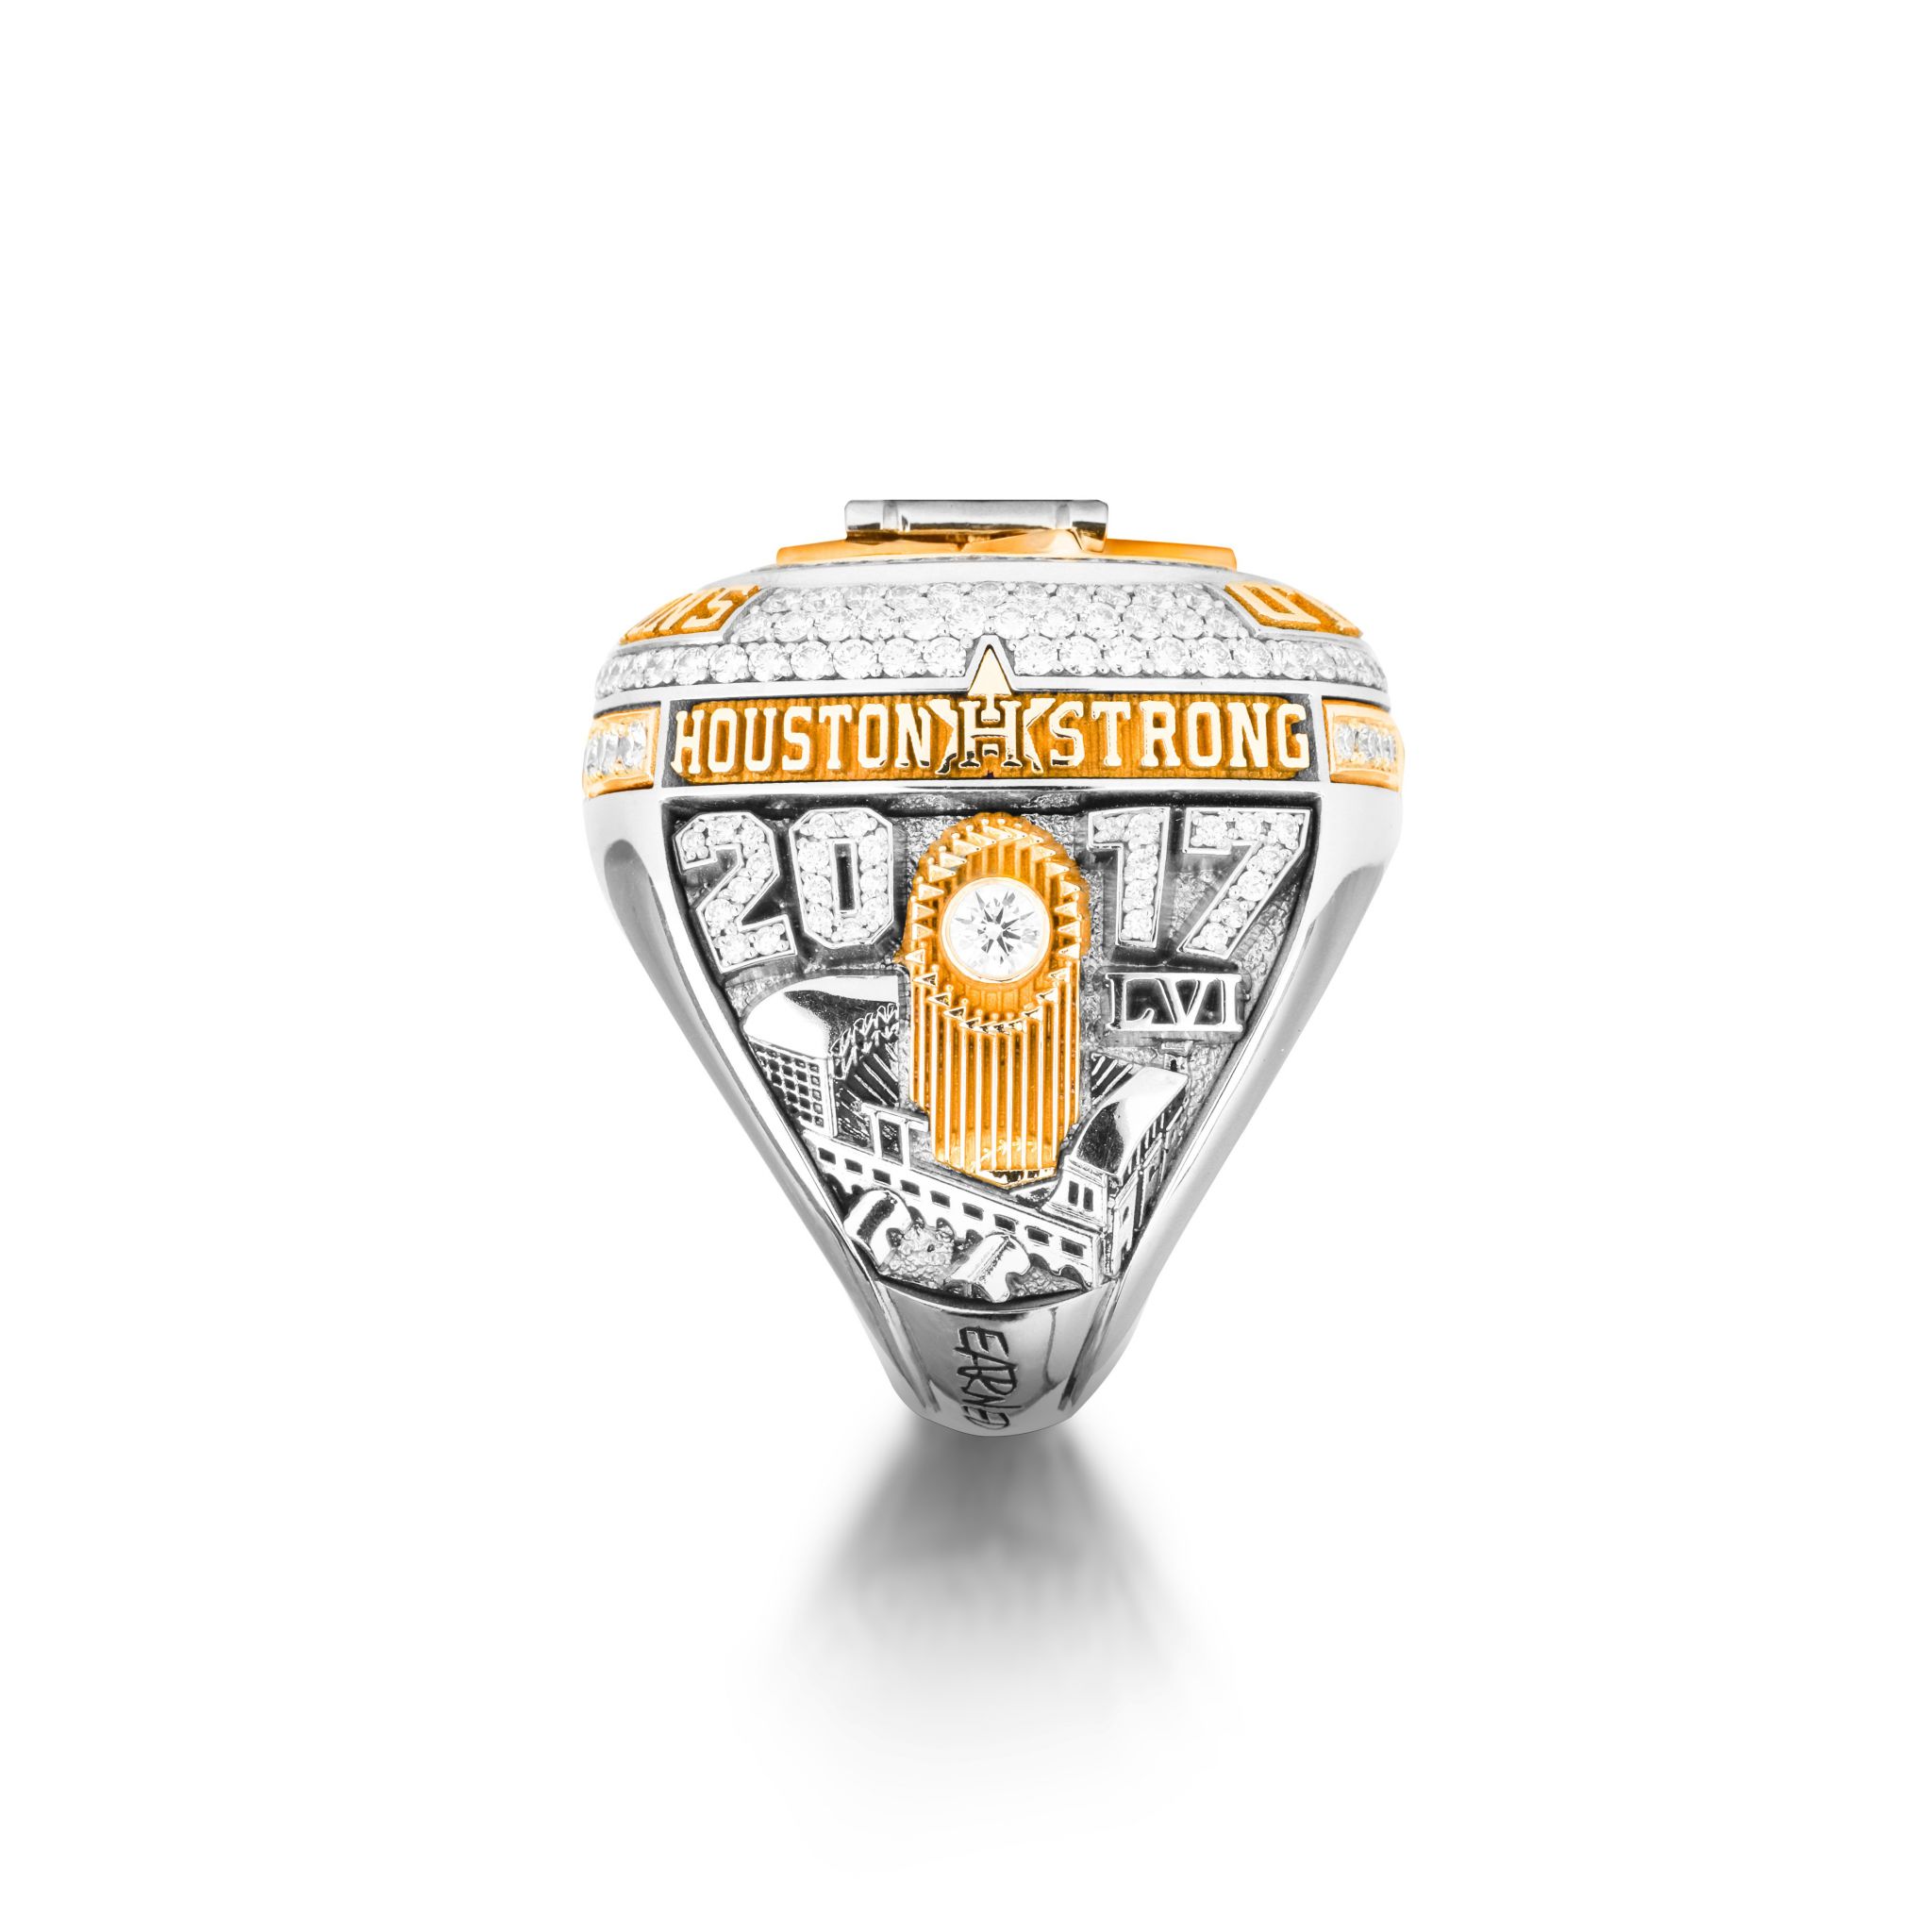 Houston Astros mascot gets very own World Series ring